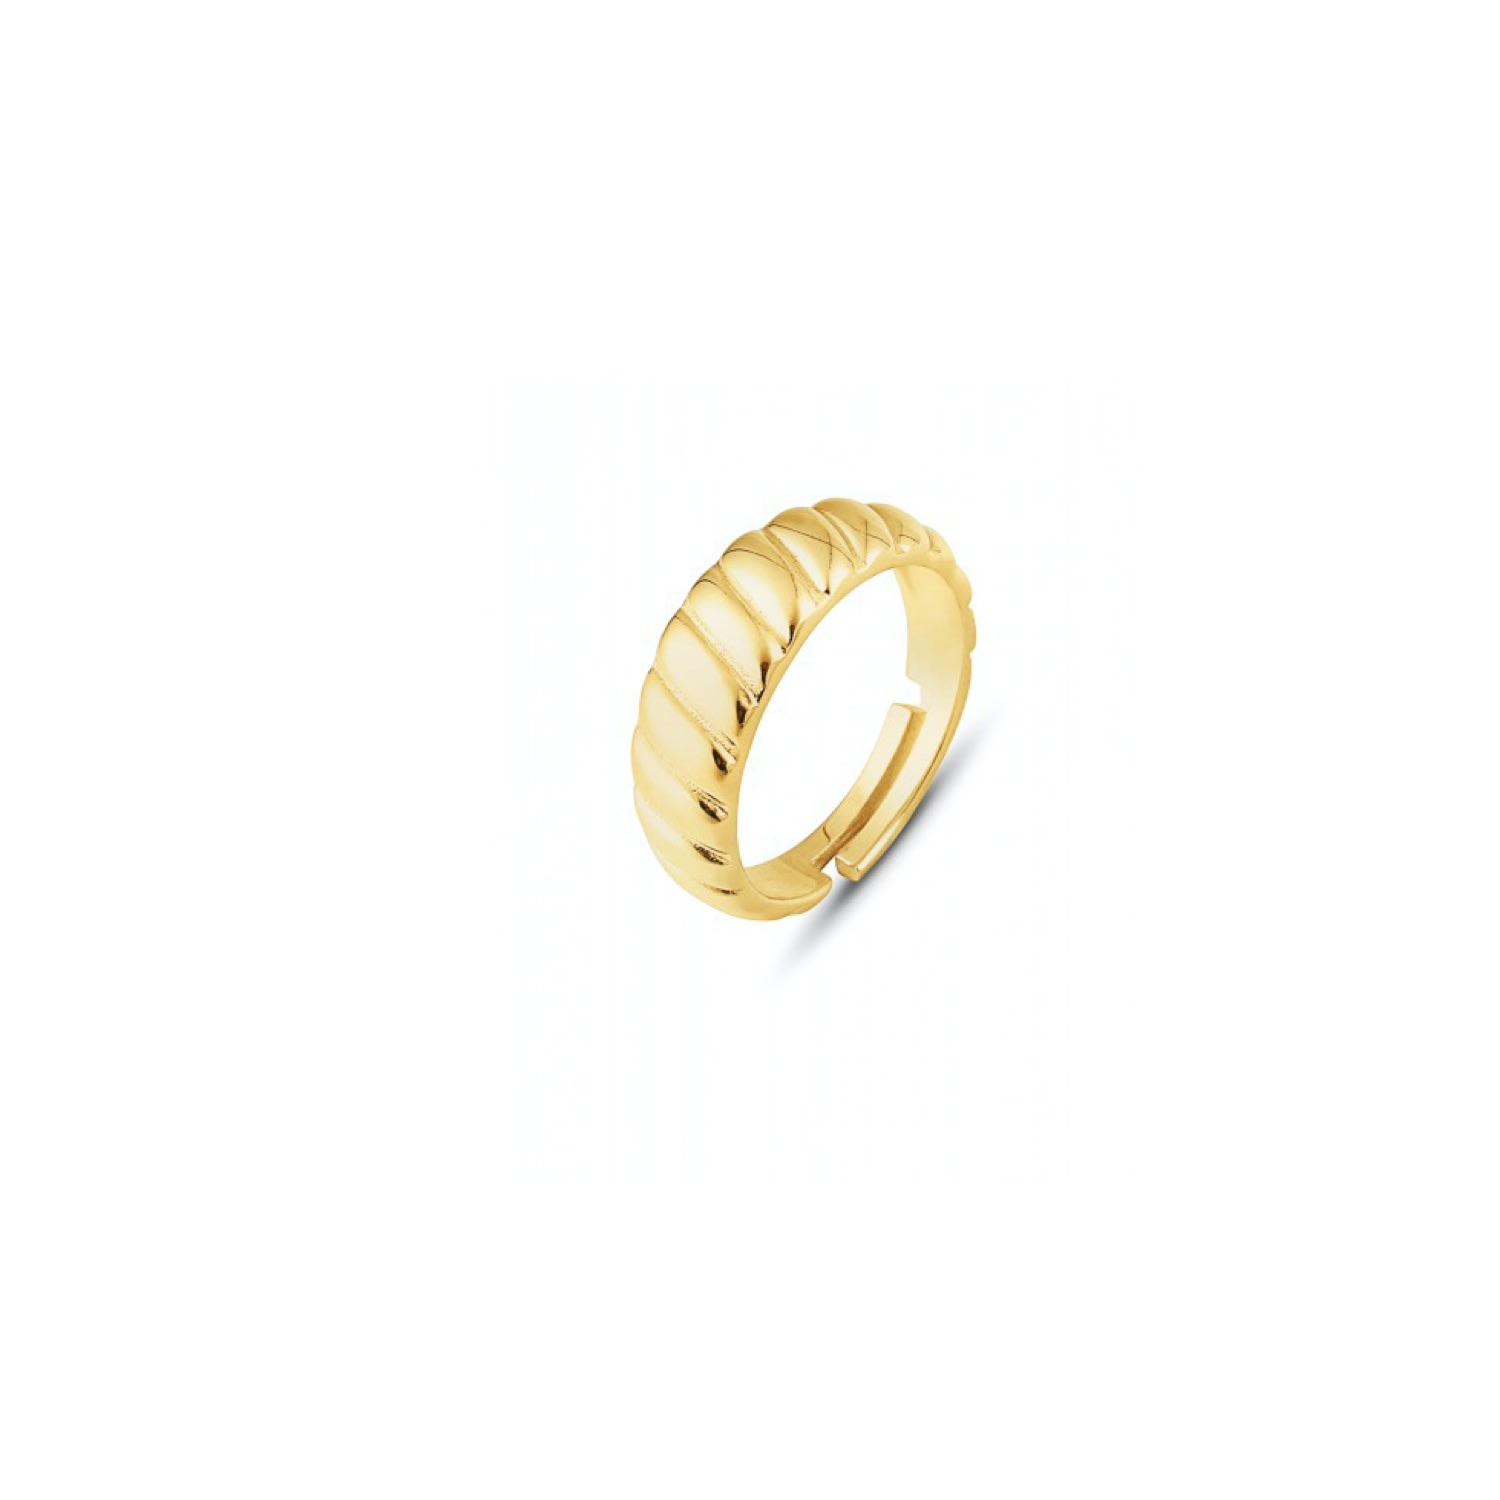 Spero London Women's Croissant Ring In Sterling Silver Gold Vermeil - Gold